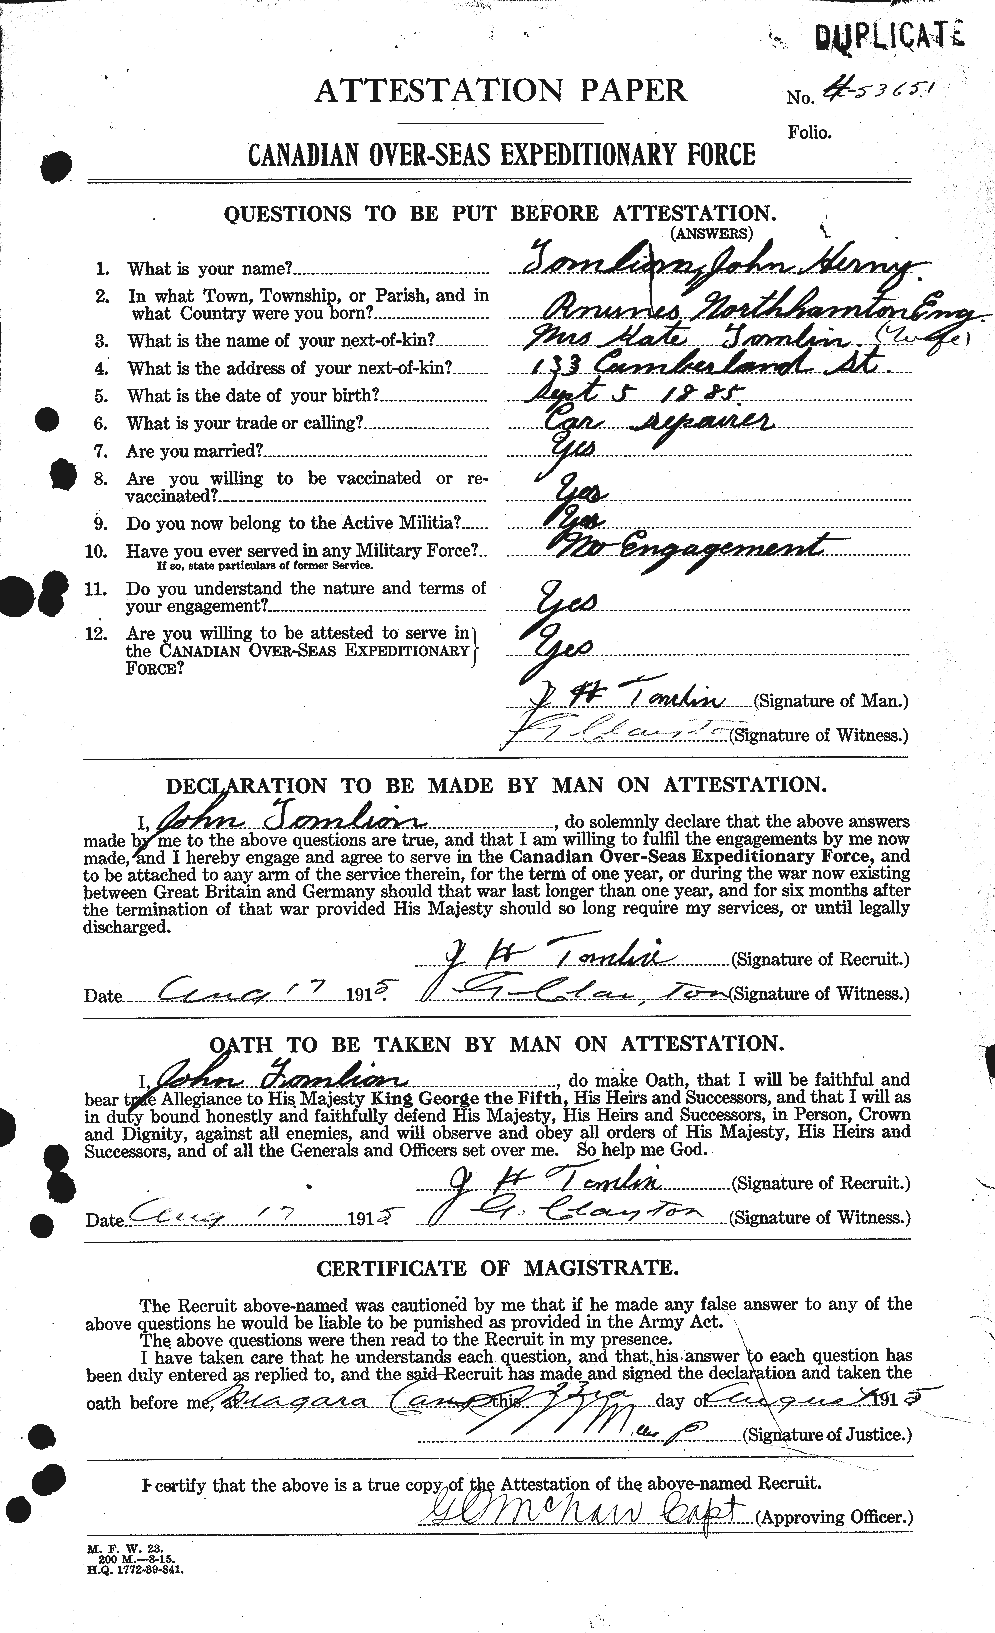 Personnel Records of the First World War - CEF 635457a